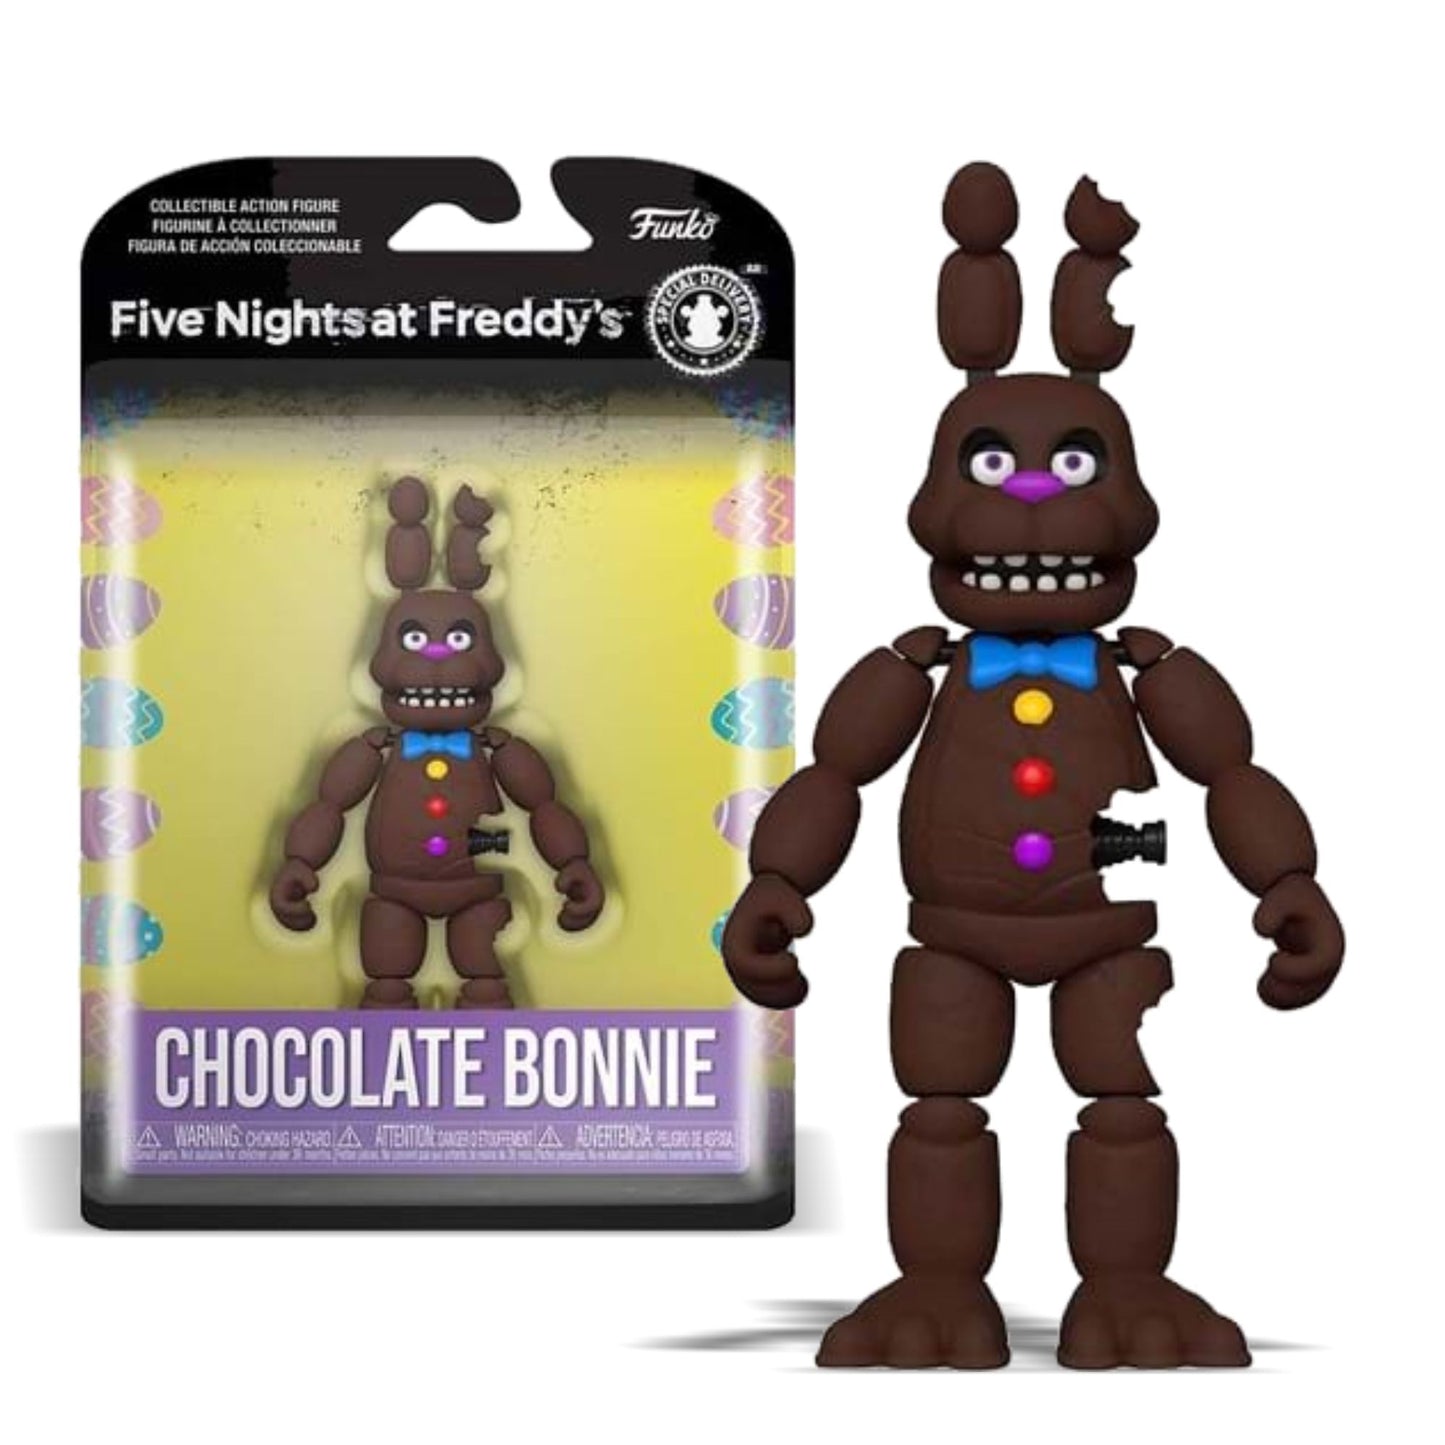 Five Night at Freddy's Chocolate Bonnie Funko 5" Action Figure